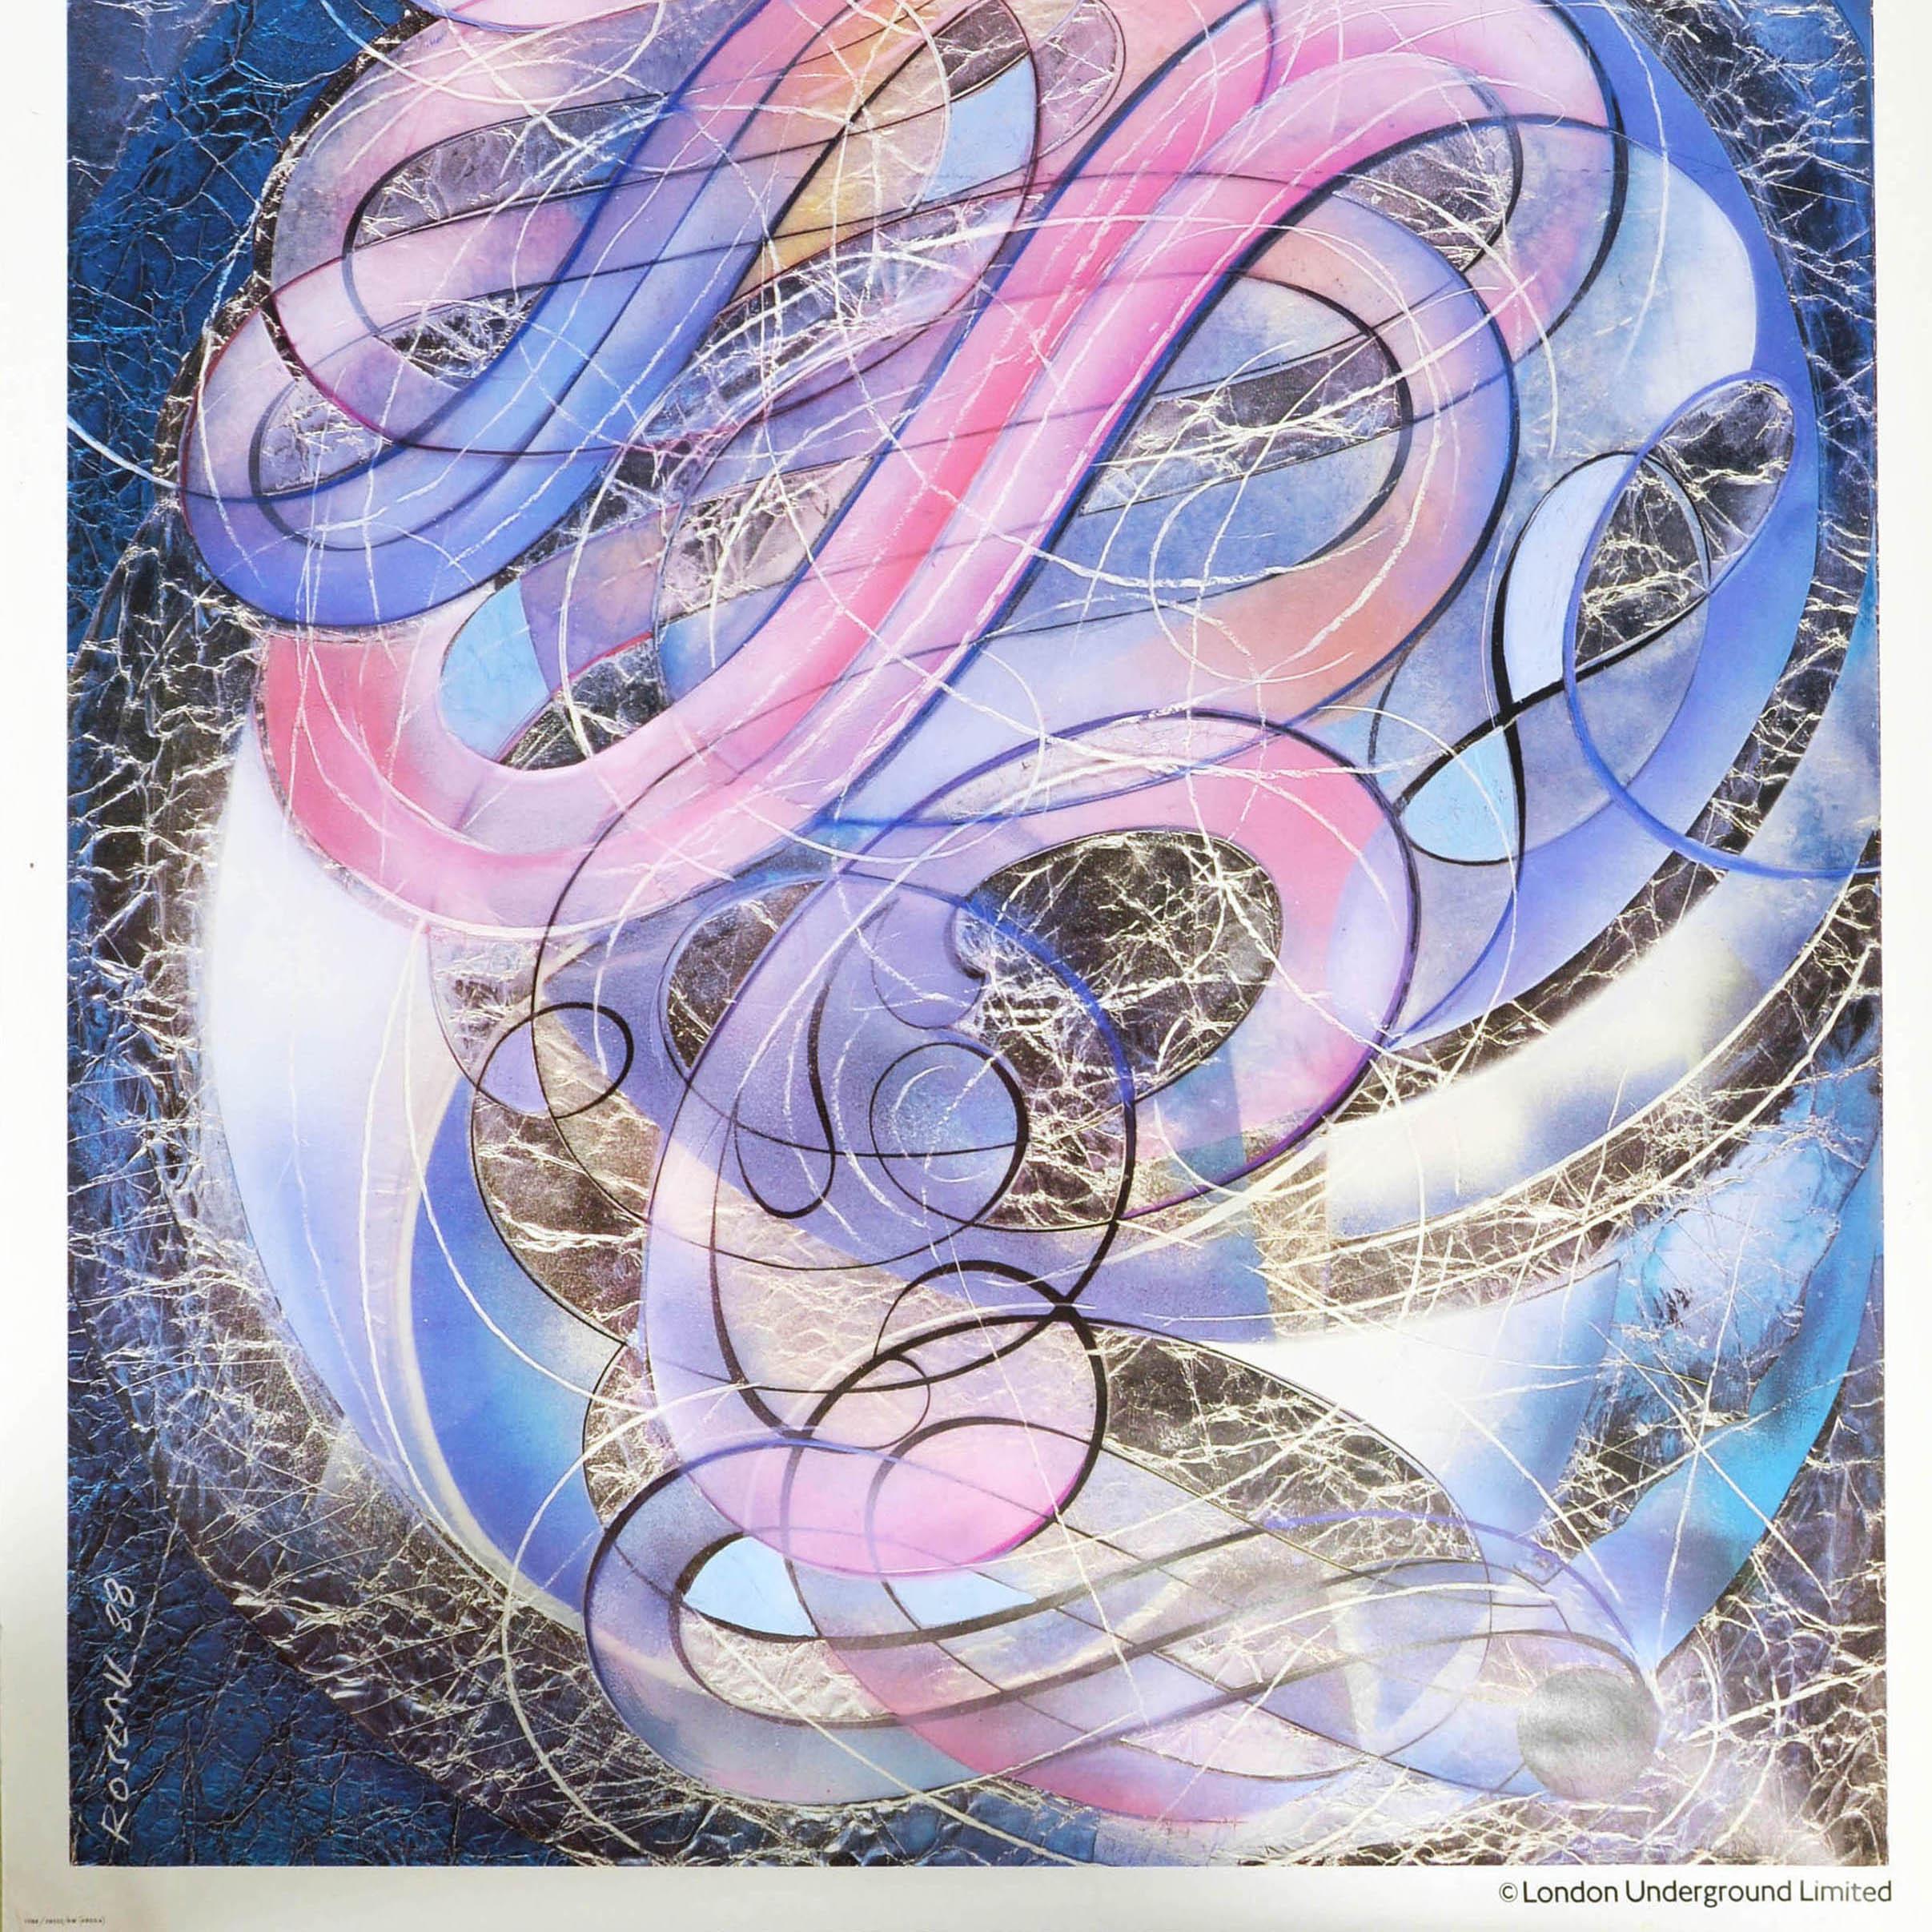 Original vintage London Underground poster - Get your skates on, by Tube nearest stations Bayswater, Queensway and Richmond - featuring a stunning abstract design showing the swirling movement of an ice skater in shades of purple and blue on the ice